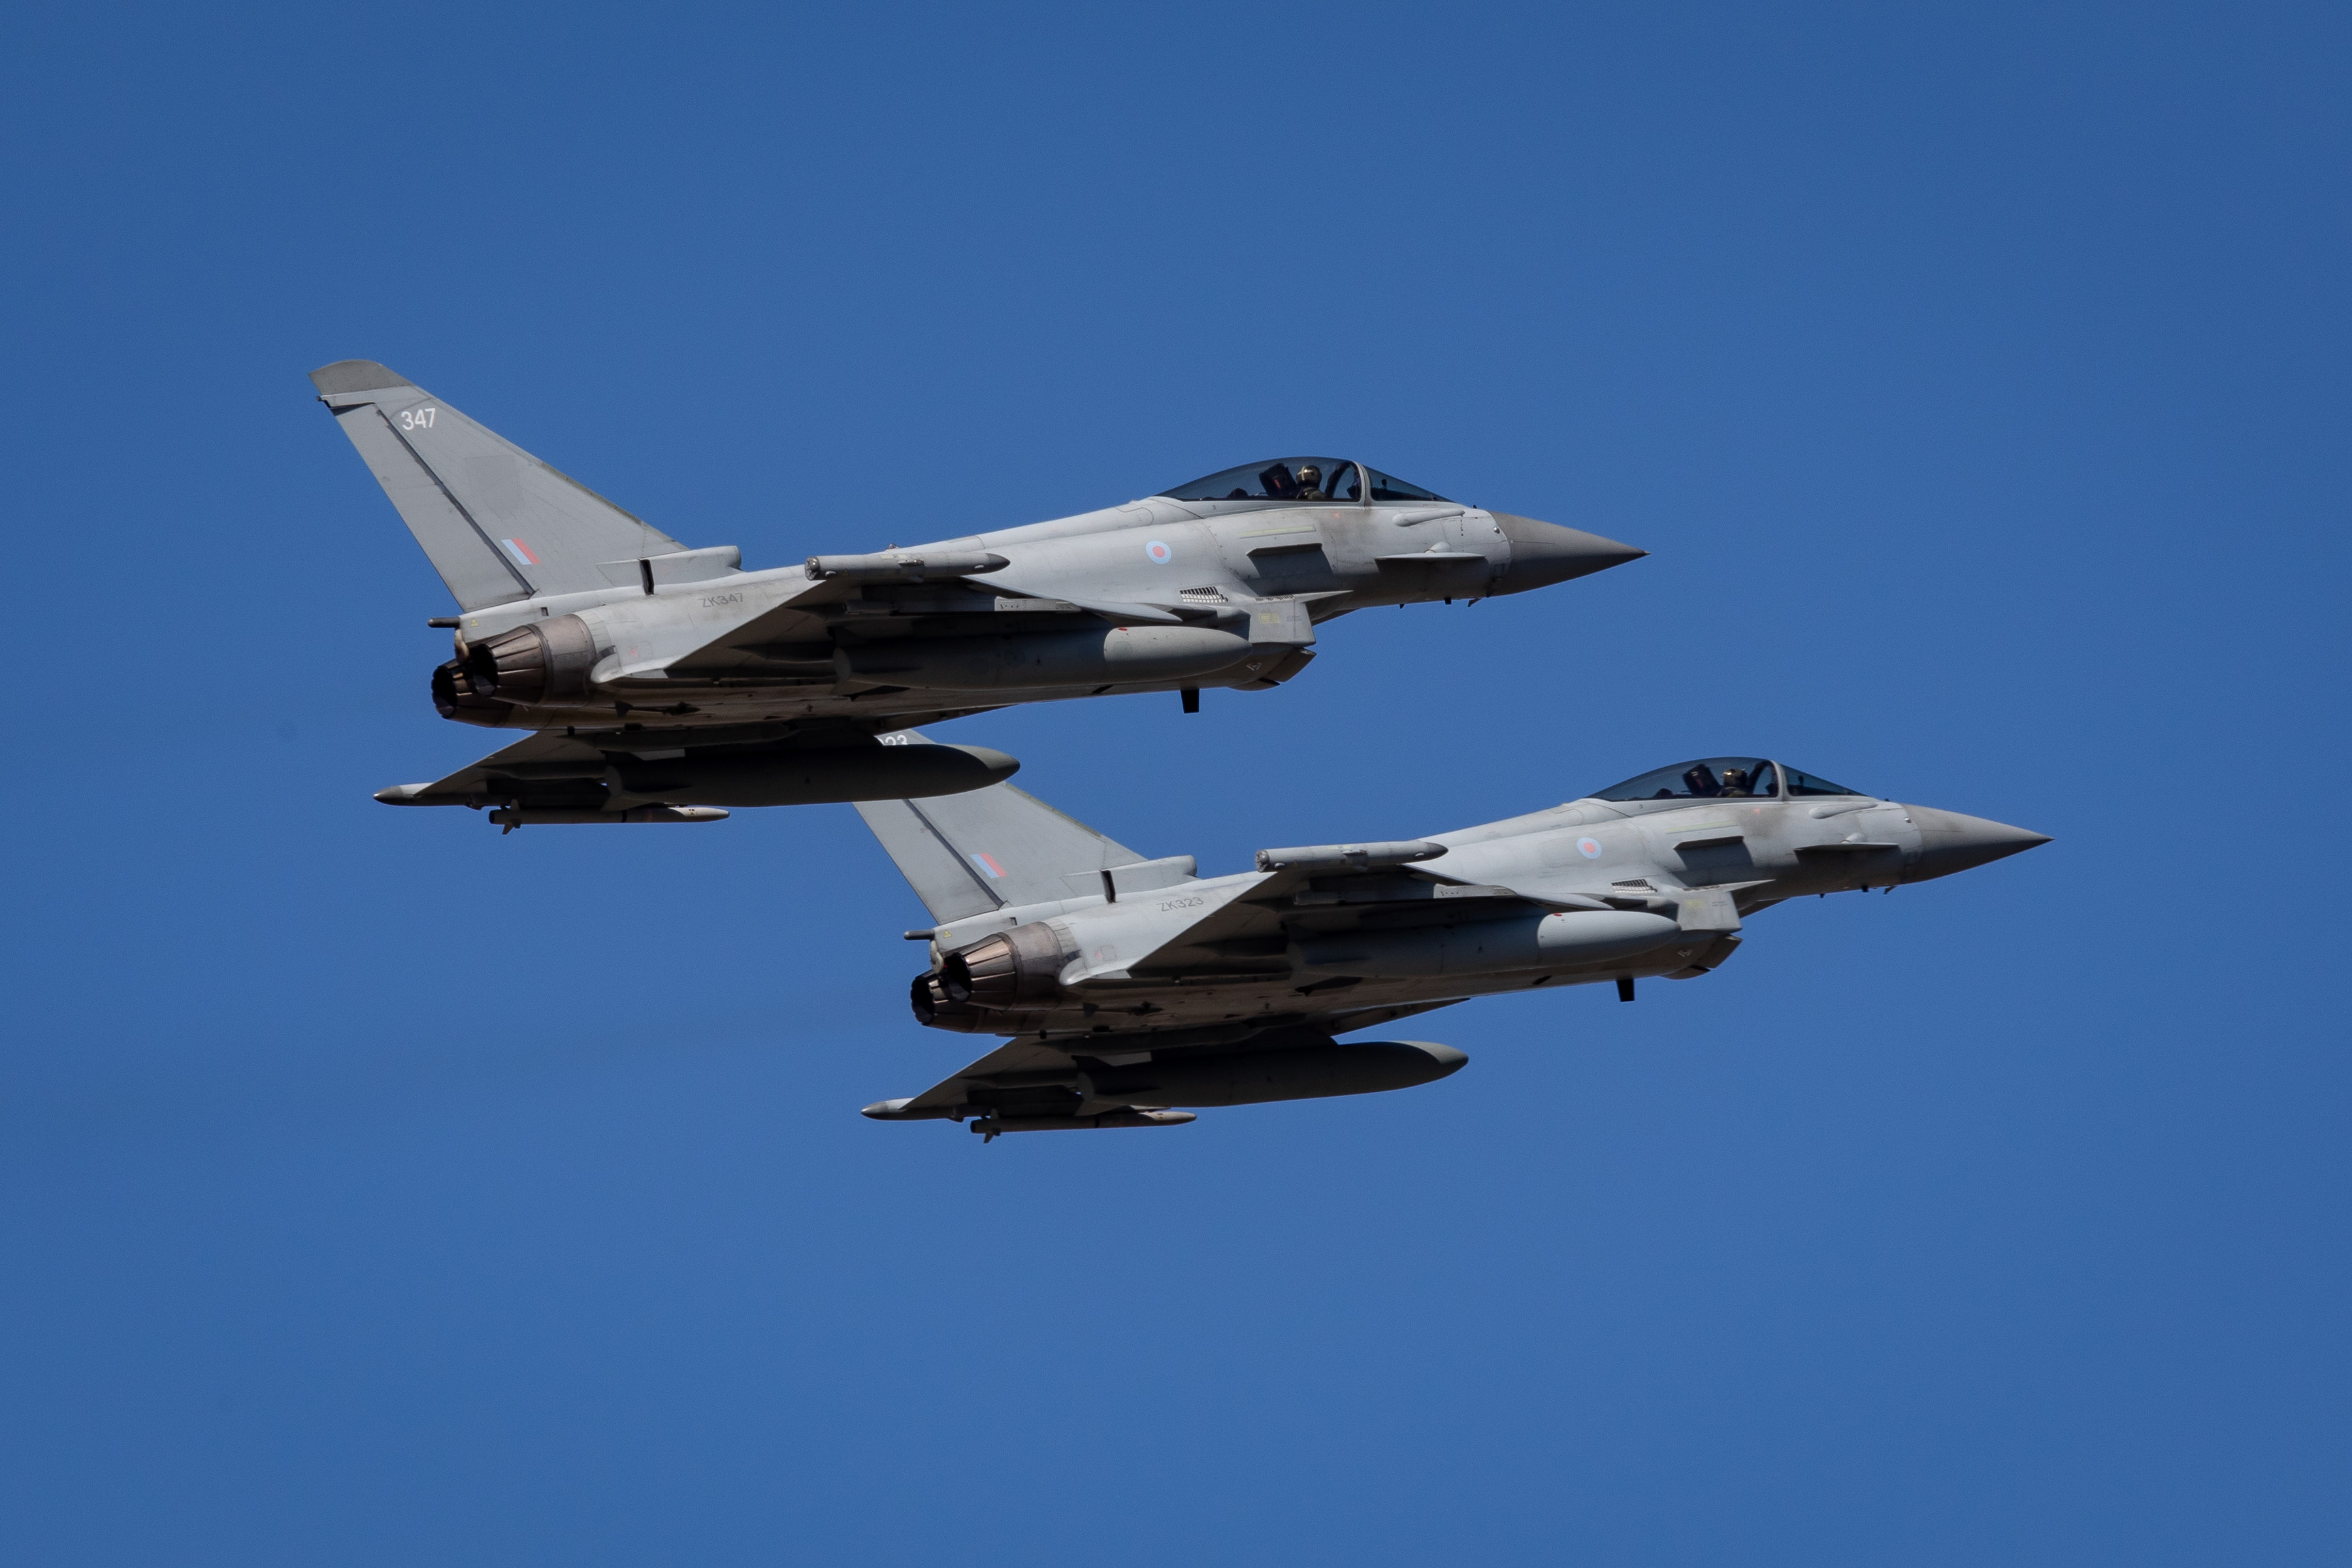 RAF Typhoons arrive In Romania for NATO Air Policing Mission